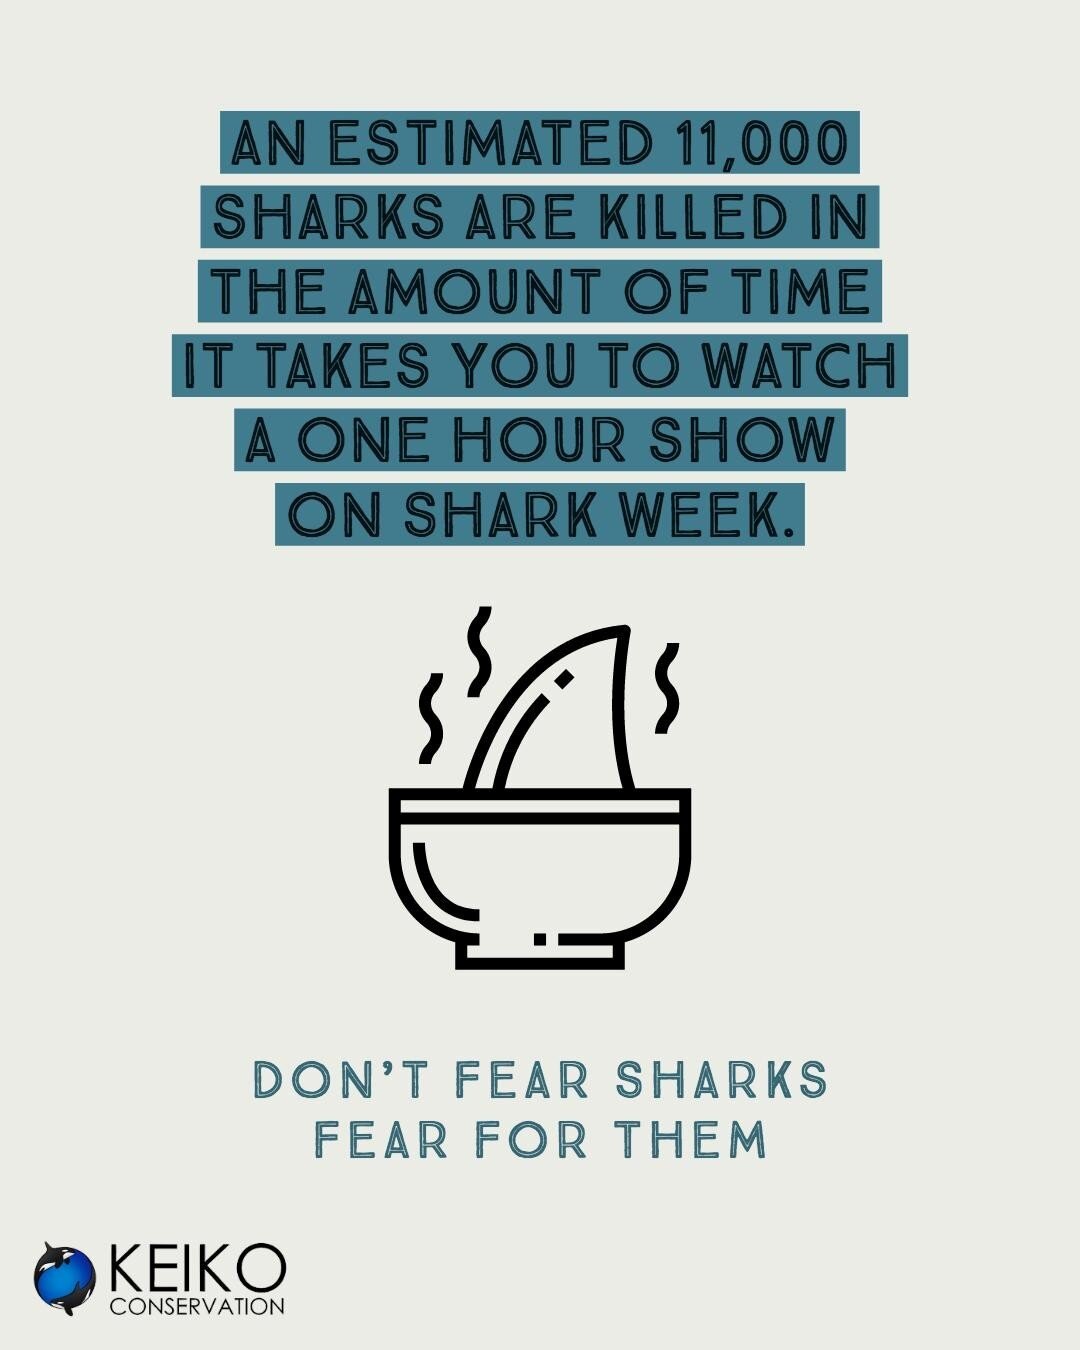 Your yearly reminder that, while we appreciate how #SharkWeek gets people excited about sharks, we're sad to see that so much of their programming demonizes sharks for nothing more than views and high paid advertisements. With 2-3 sharks being killed